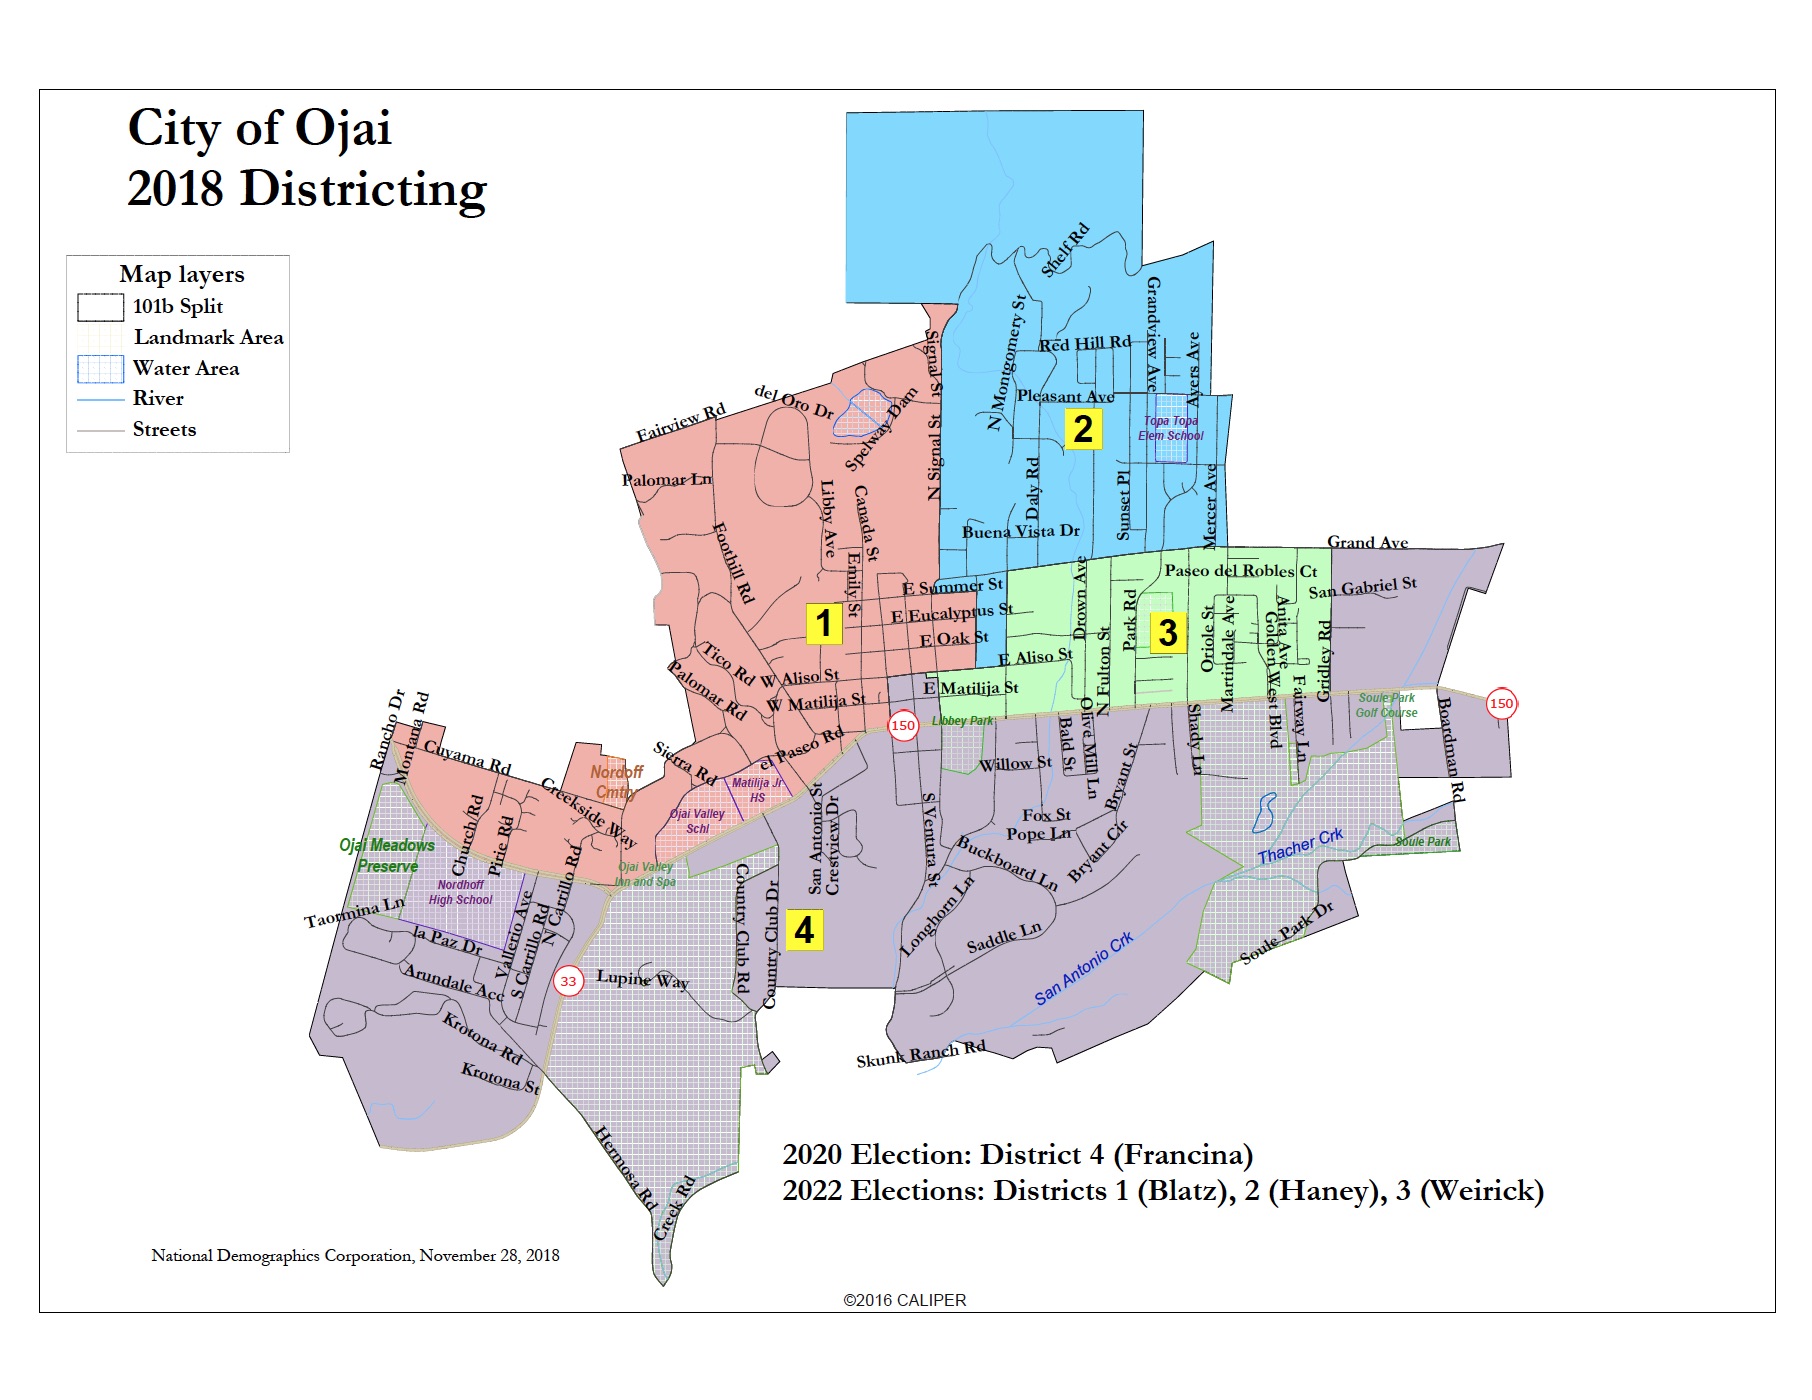 Ojai's voting districts